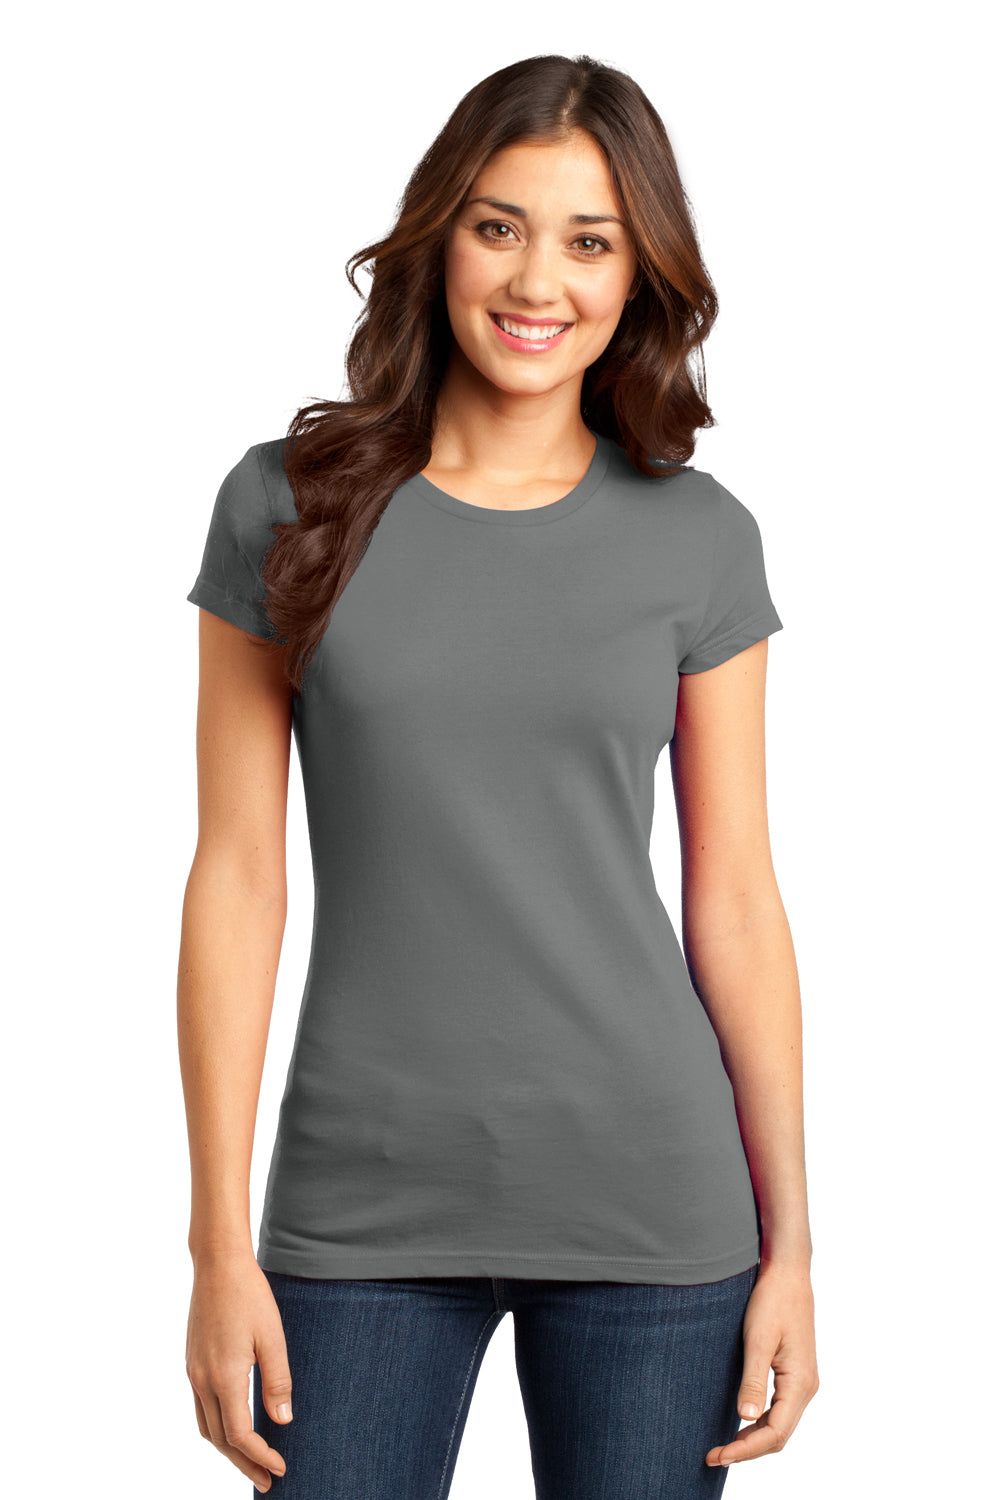 District DT6001 Womens Very Important Short Sleeve Crewneck T-Shirt Grey Front